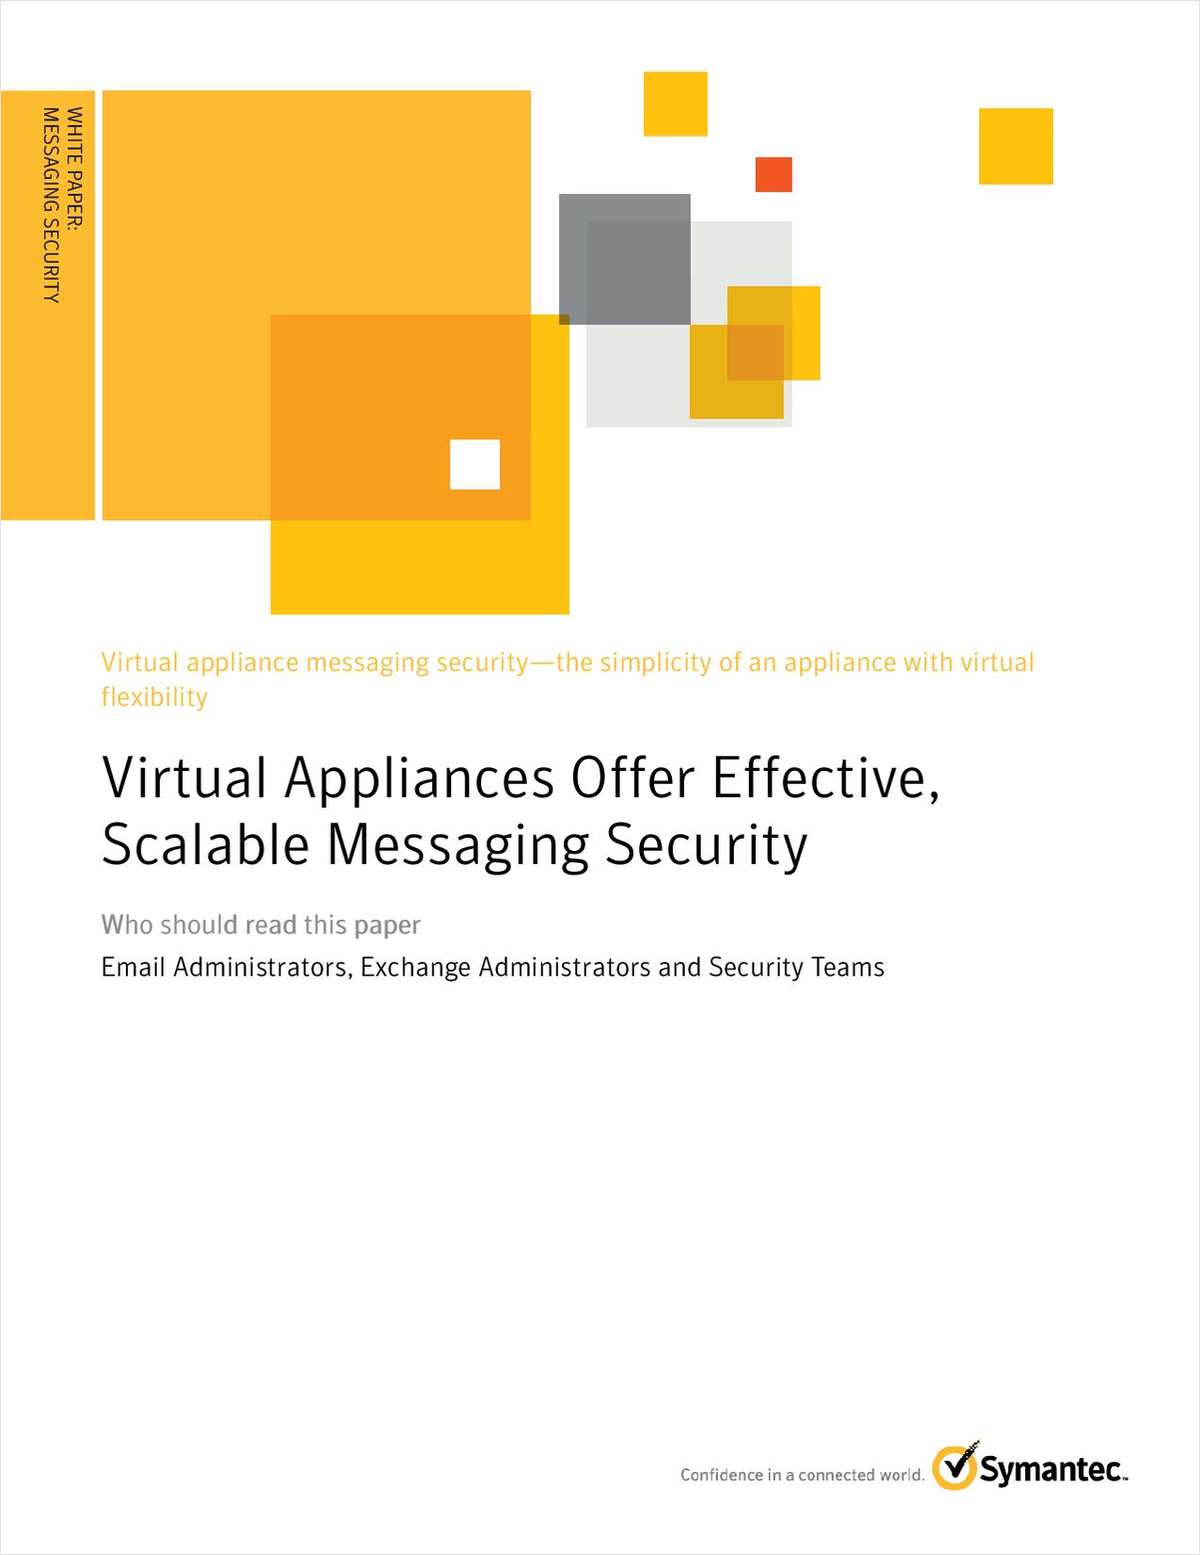 Virtual Appliances Offer Effective, Scalable Messaging Security